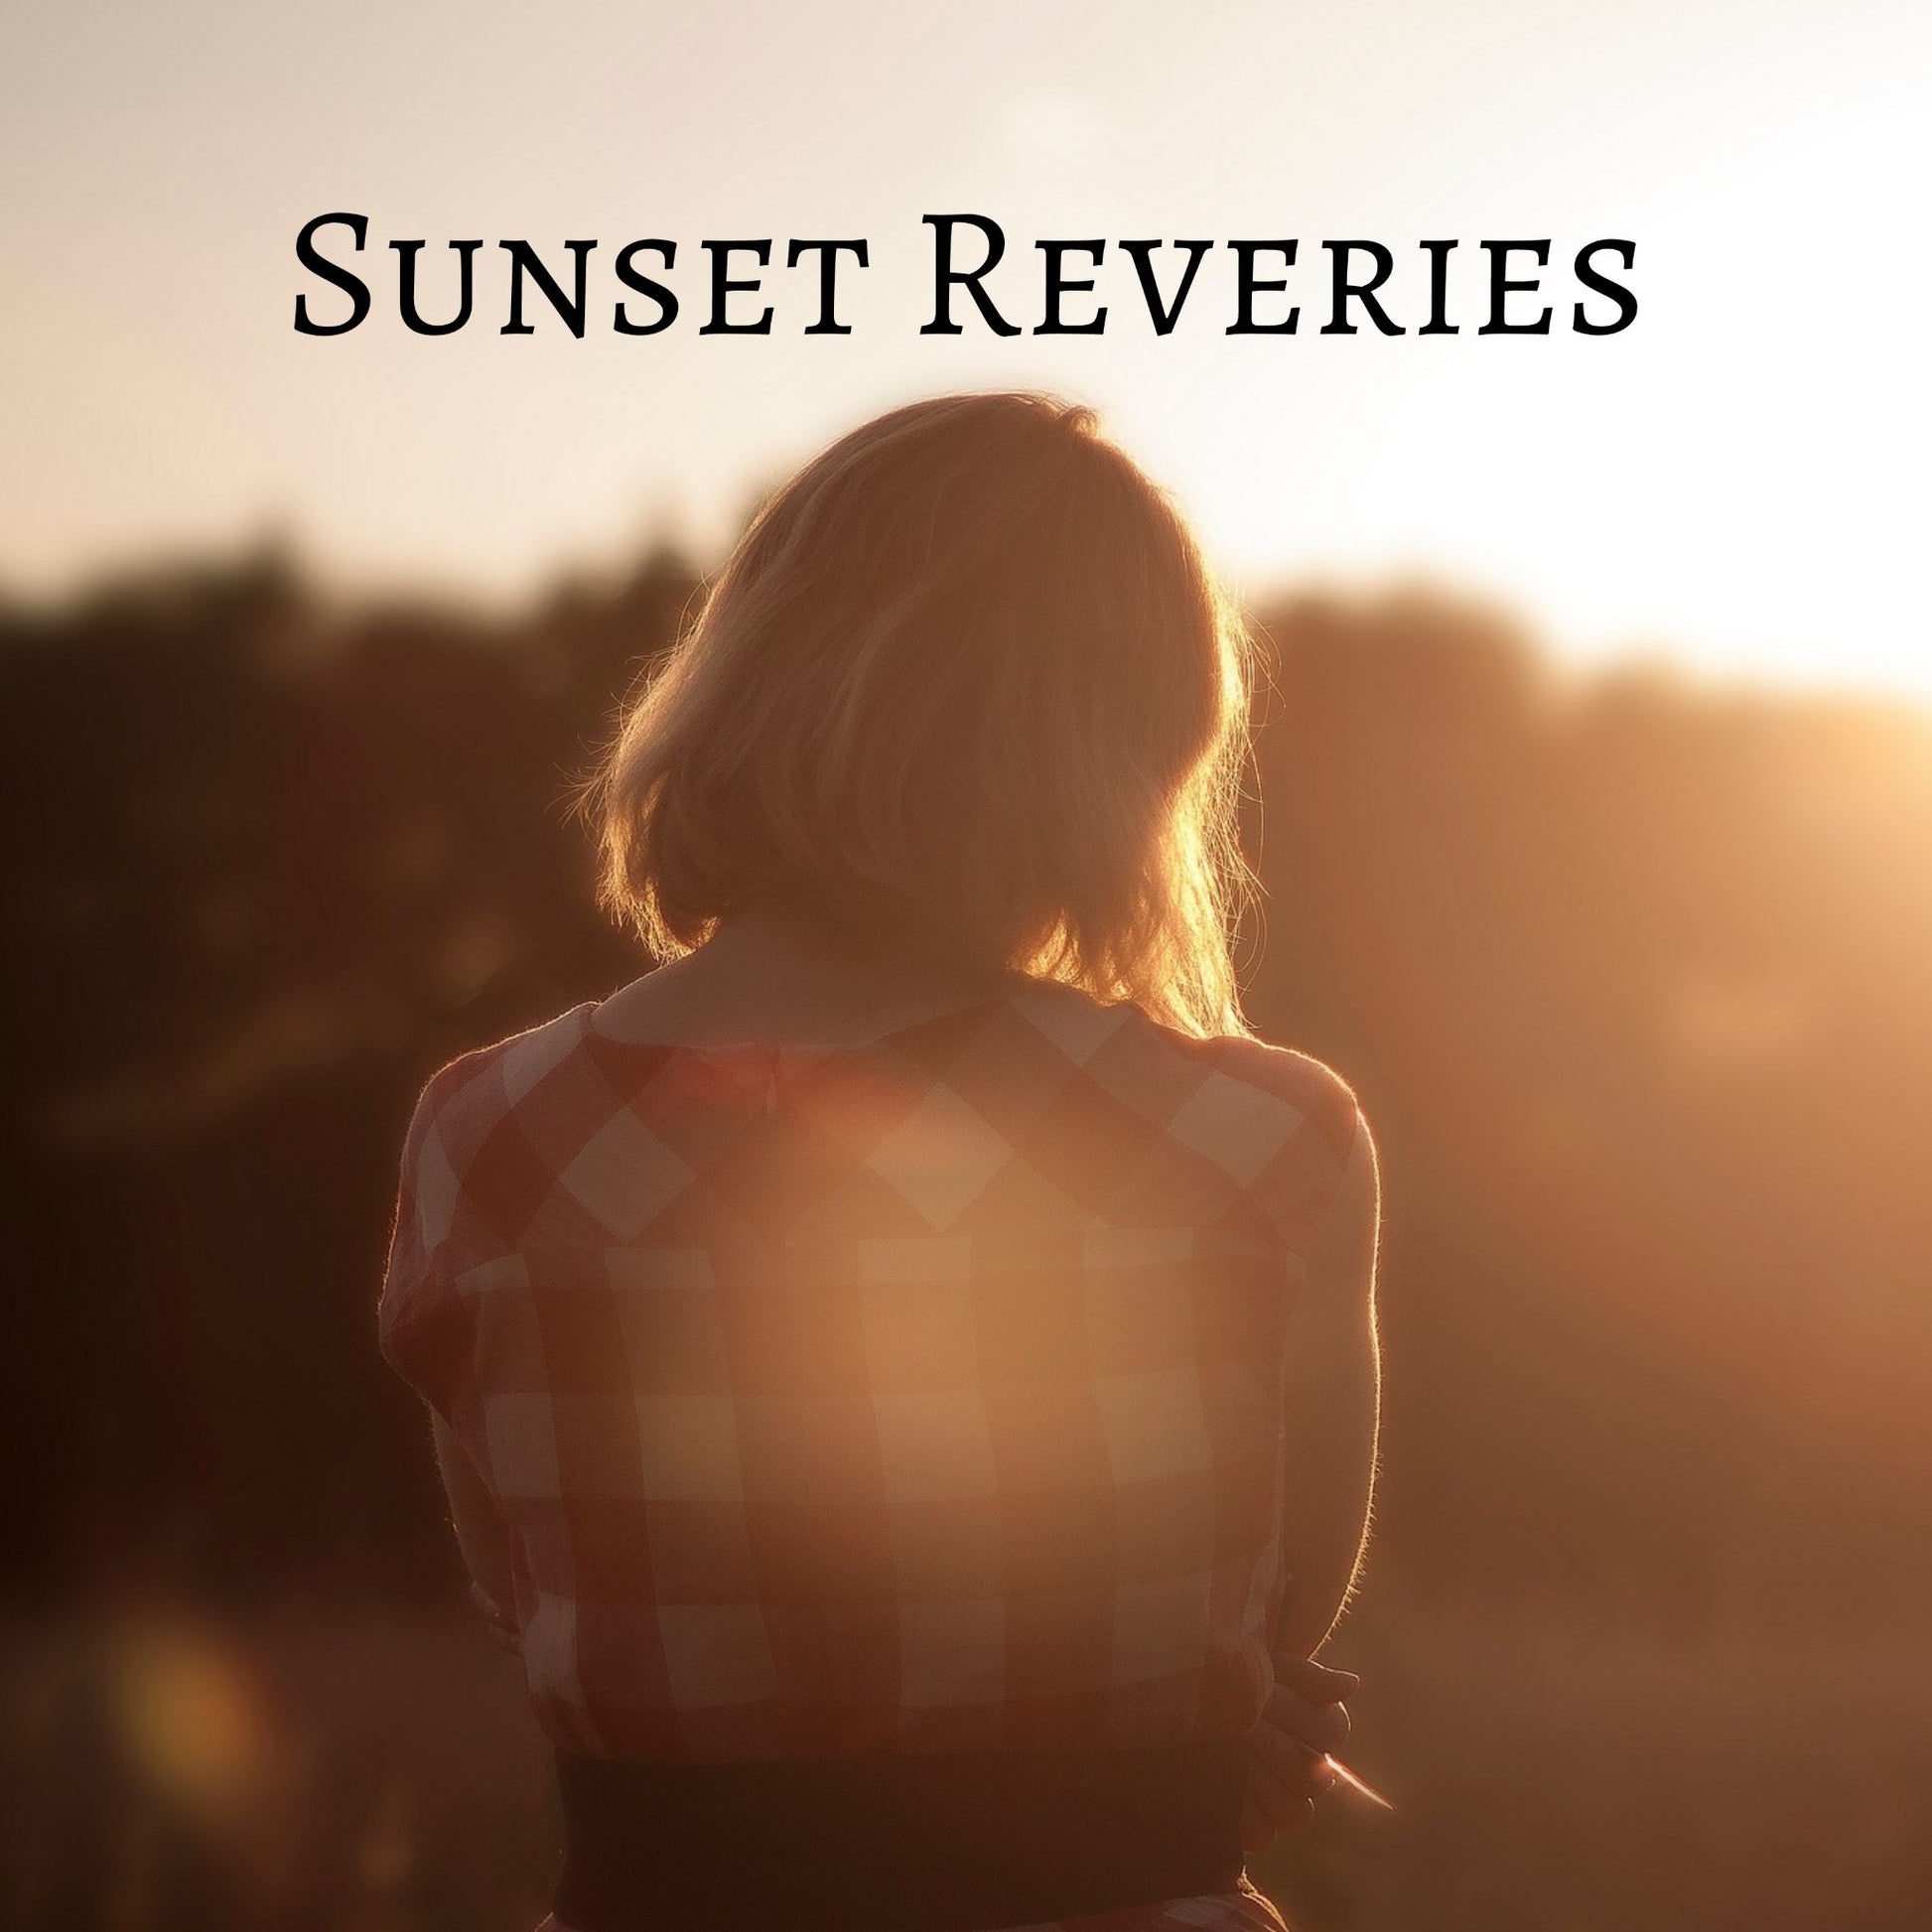 CD Cover of song Sunset Reveries